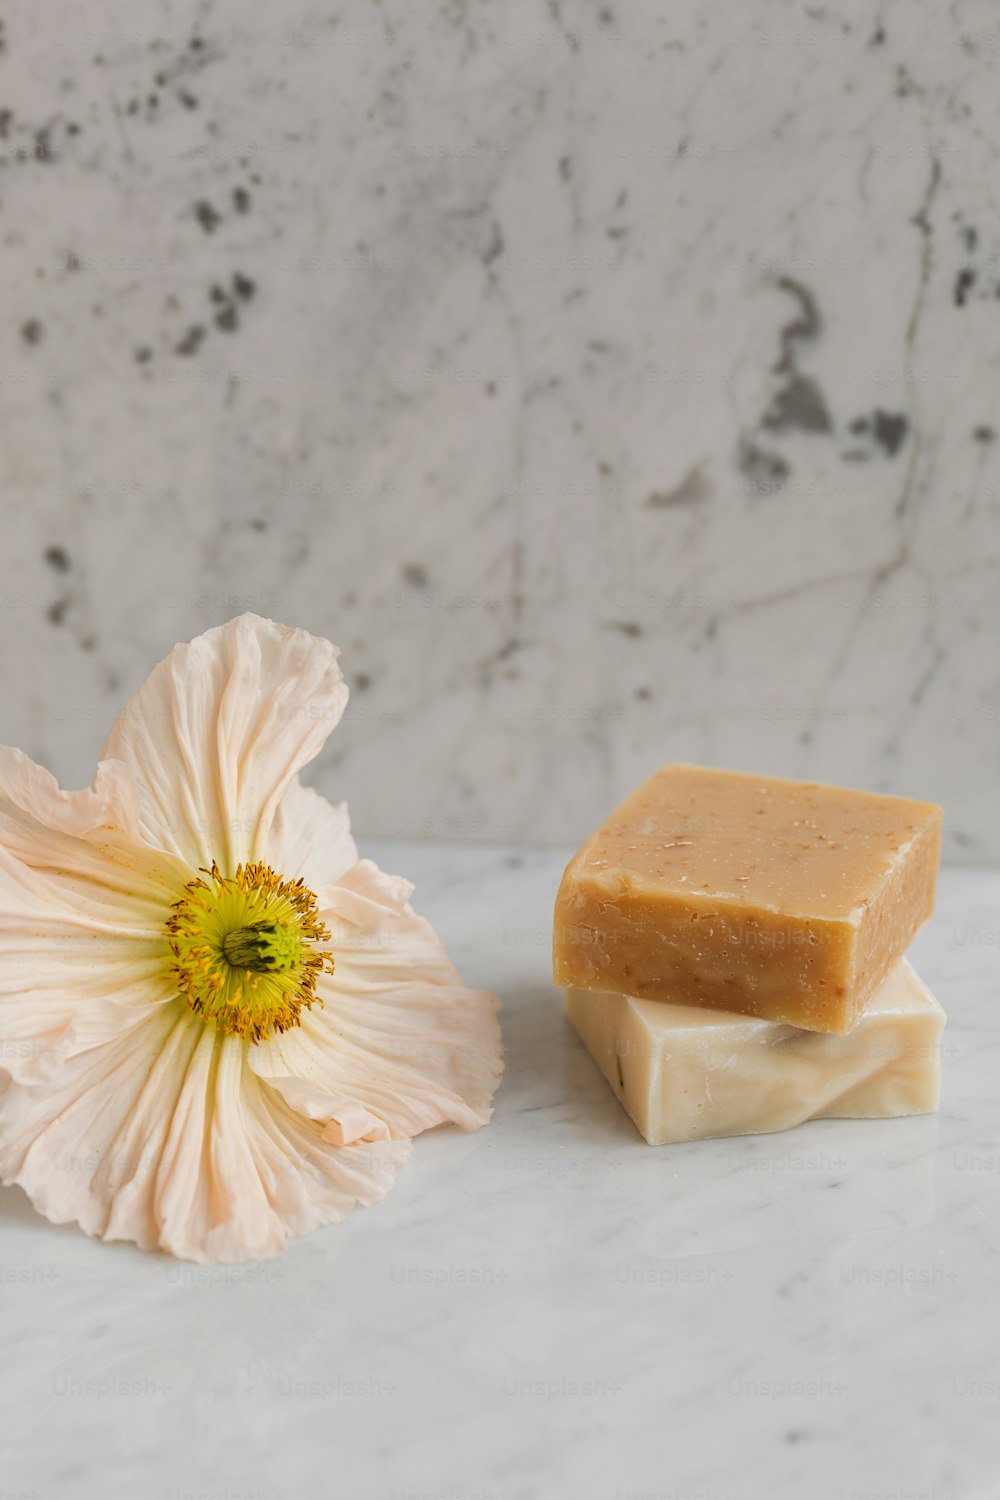 a soap bar next to a flower on a marble surface